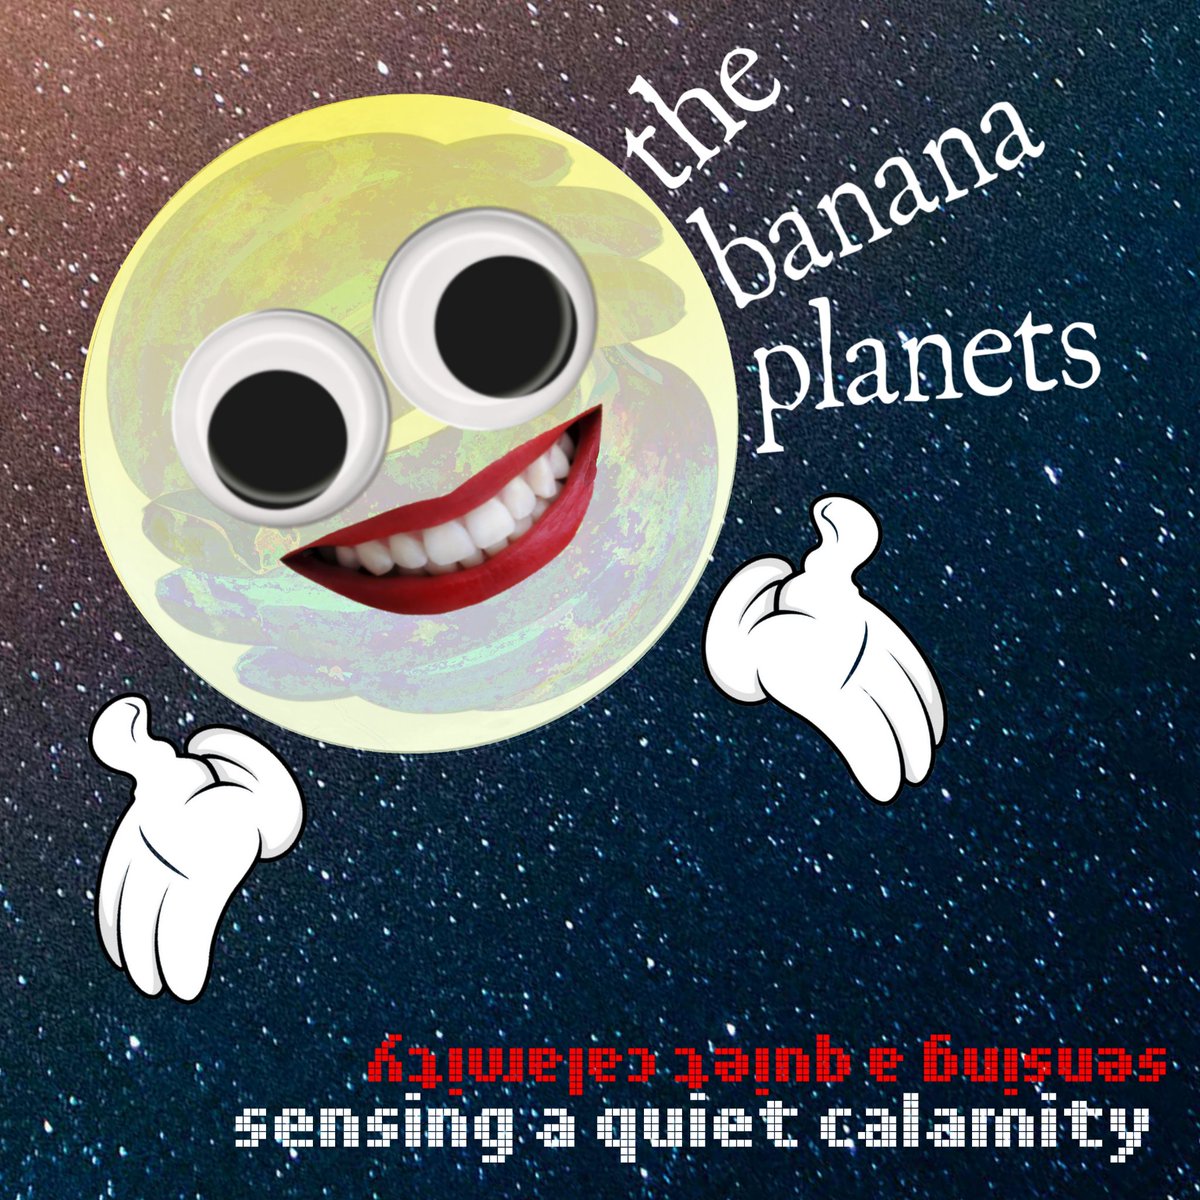 Presenting to you the debut EP from a magical and mysterious duo made from pure indie music, The Banana Planets... 'Sensing a Quiet Calamity'. 🍌🌎

bit.ly/SensingAQuietC…
Available on Spotify now.

#NewMusic #AltRock #listeningnow #playingnow #NewMusicFriday #NewMusic2019